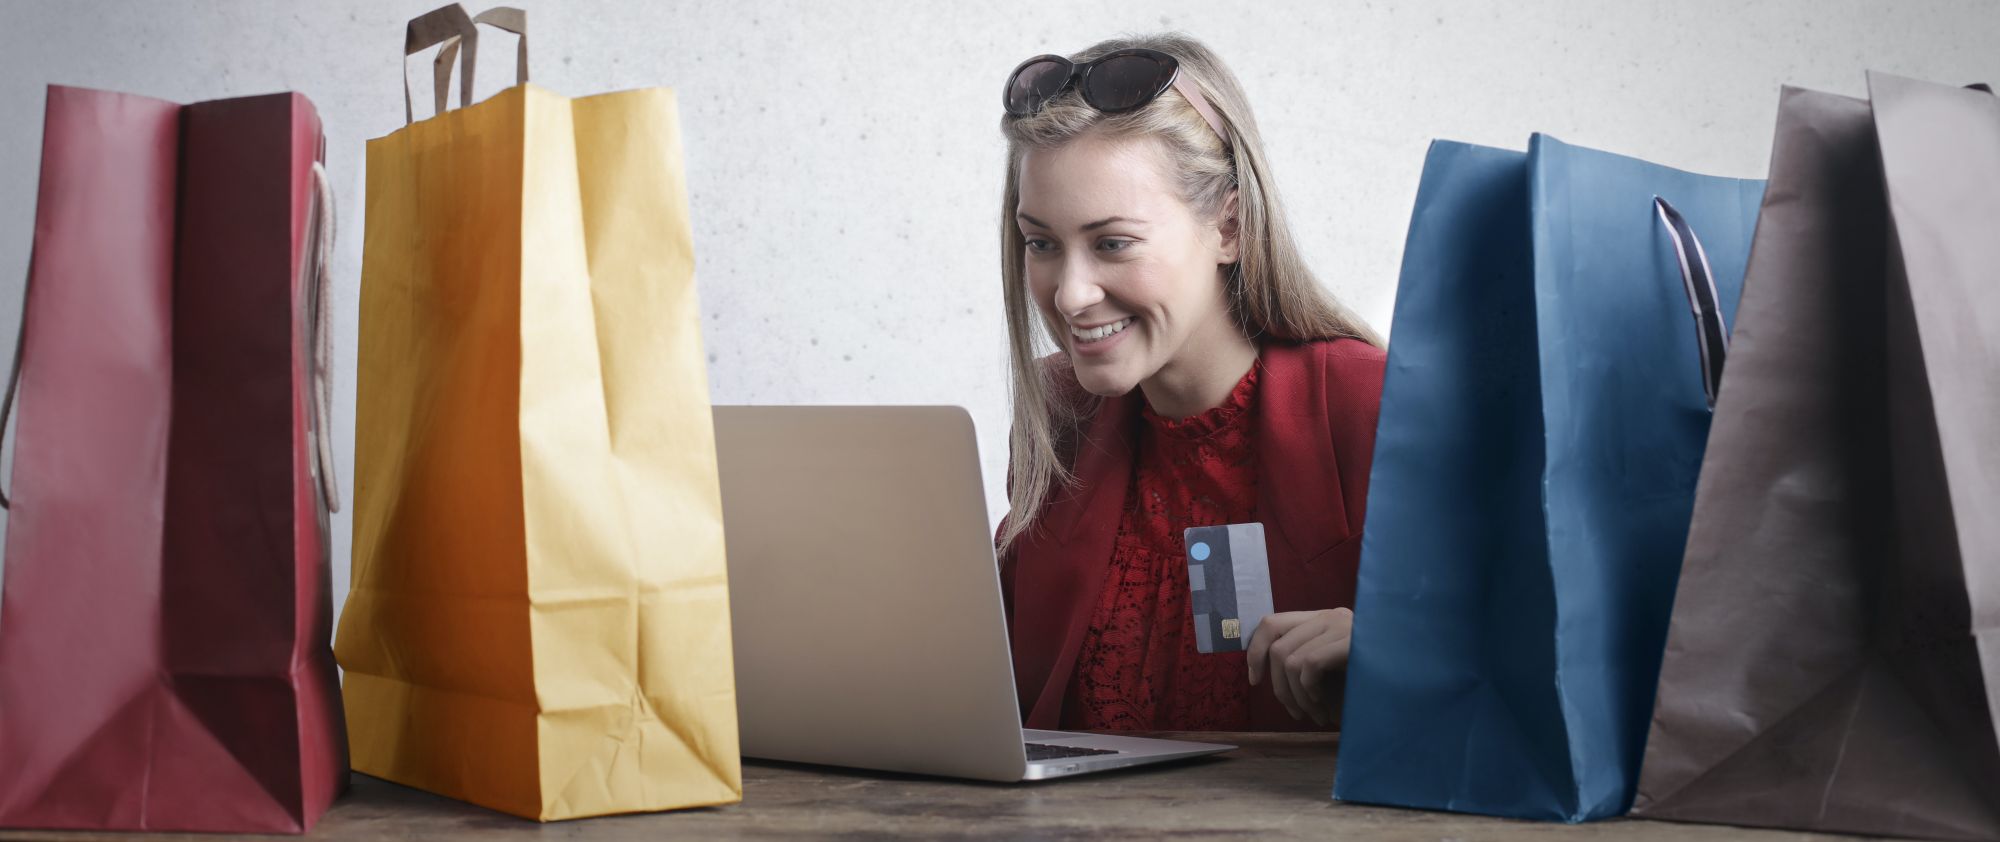 Woman holding credit card using laptop surrounded by colourful shopping bags